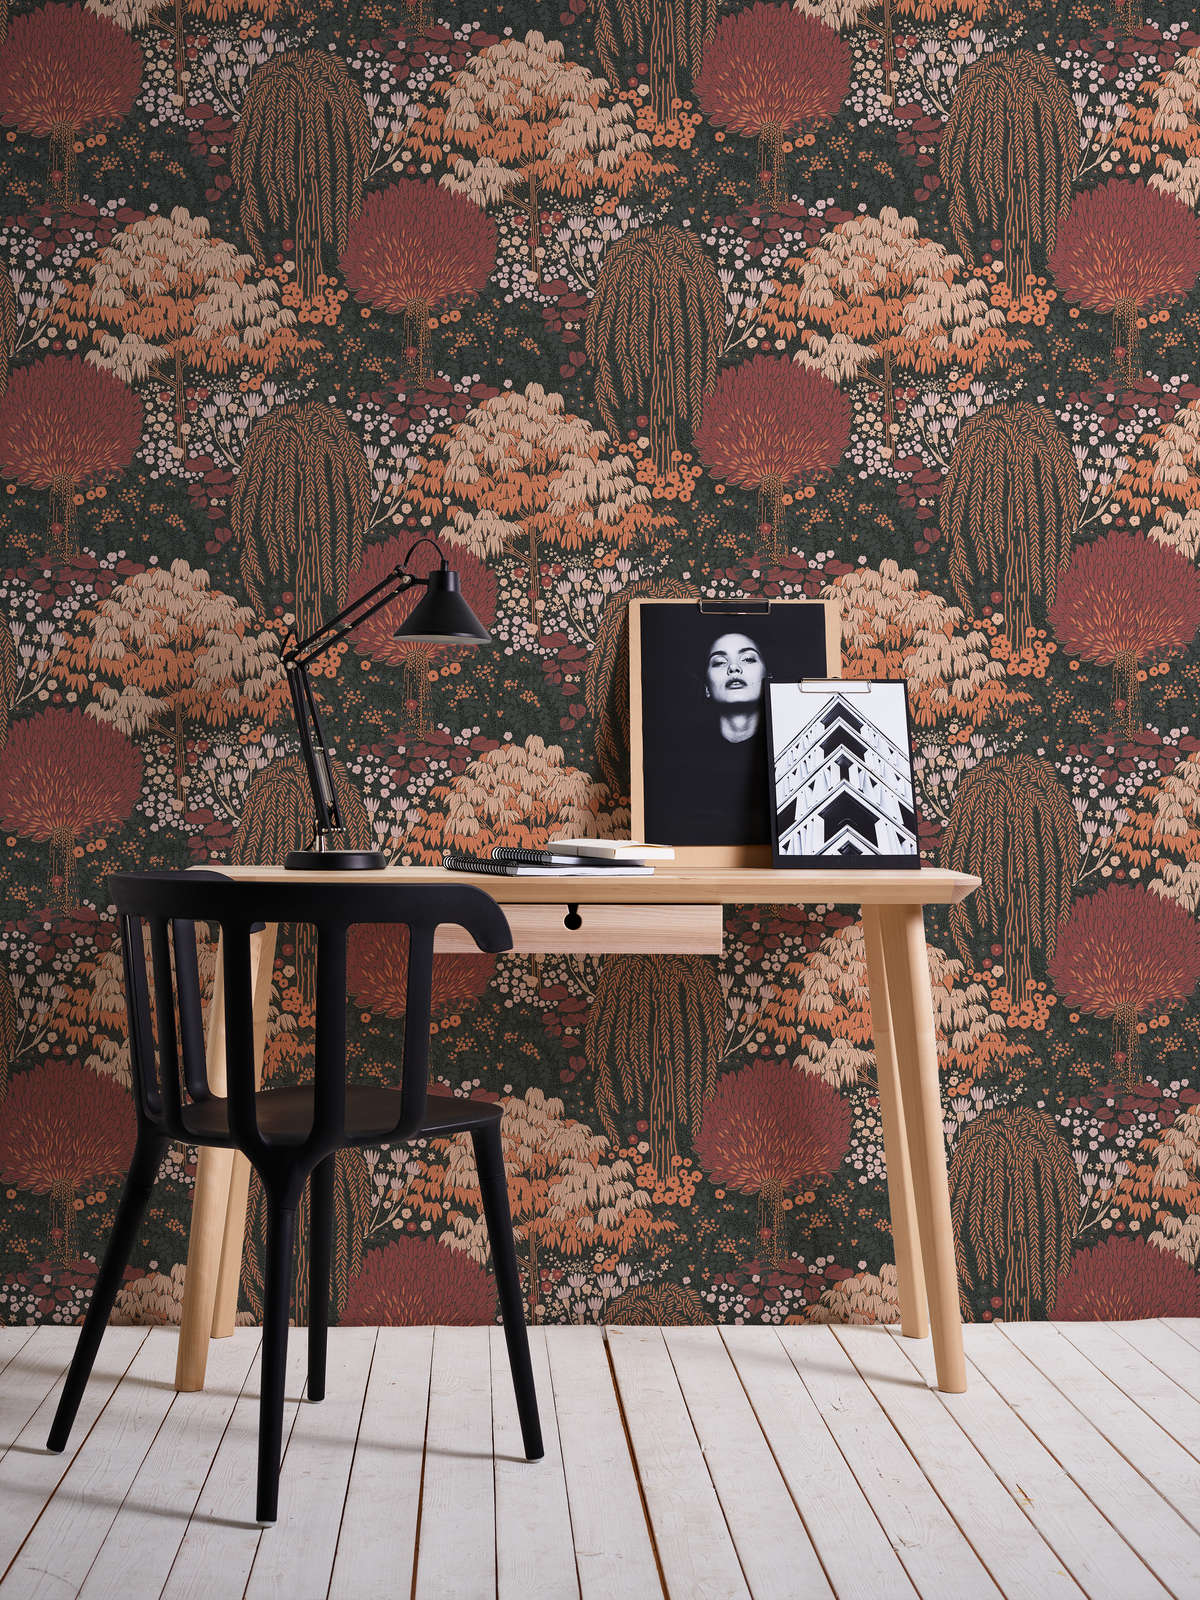             Non-woven wallpaper floral with leaves light textured, matt - black, red, pink
        